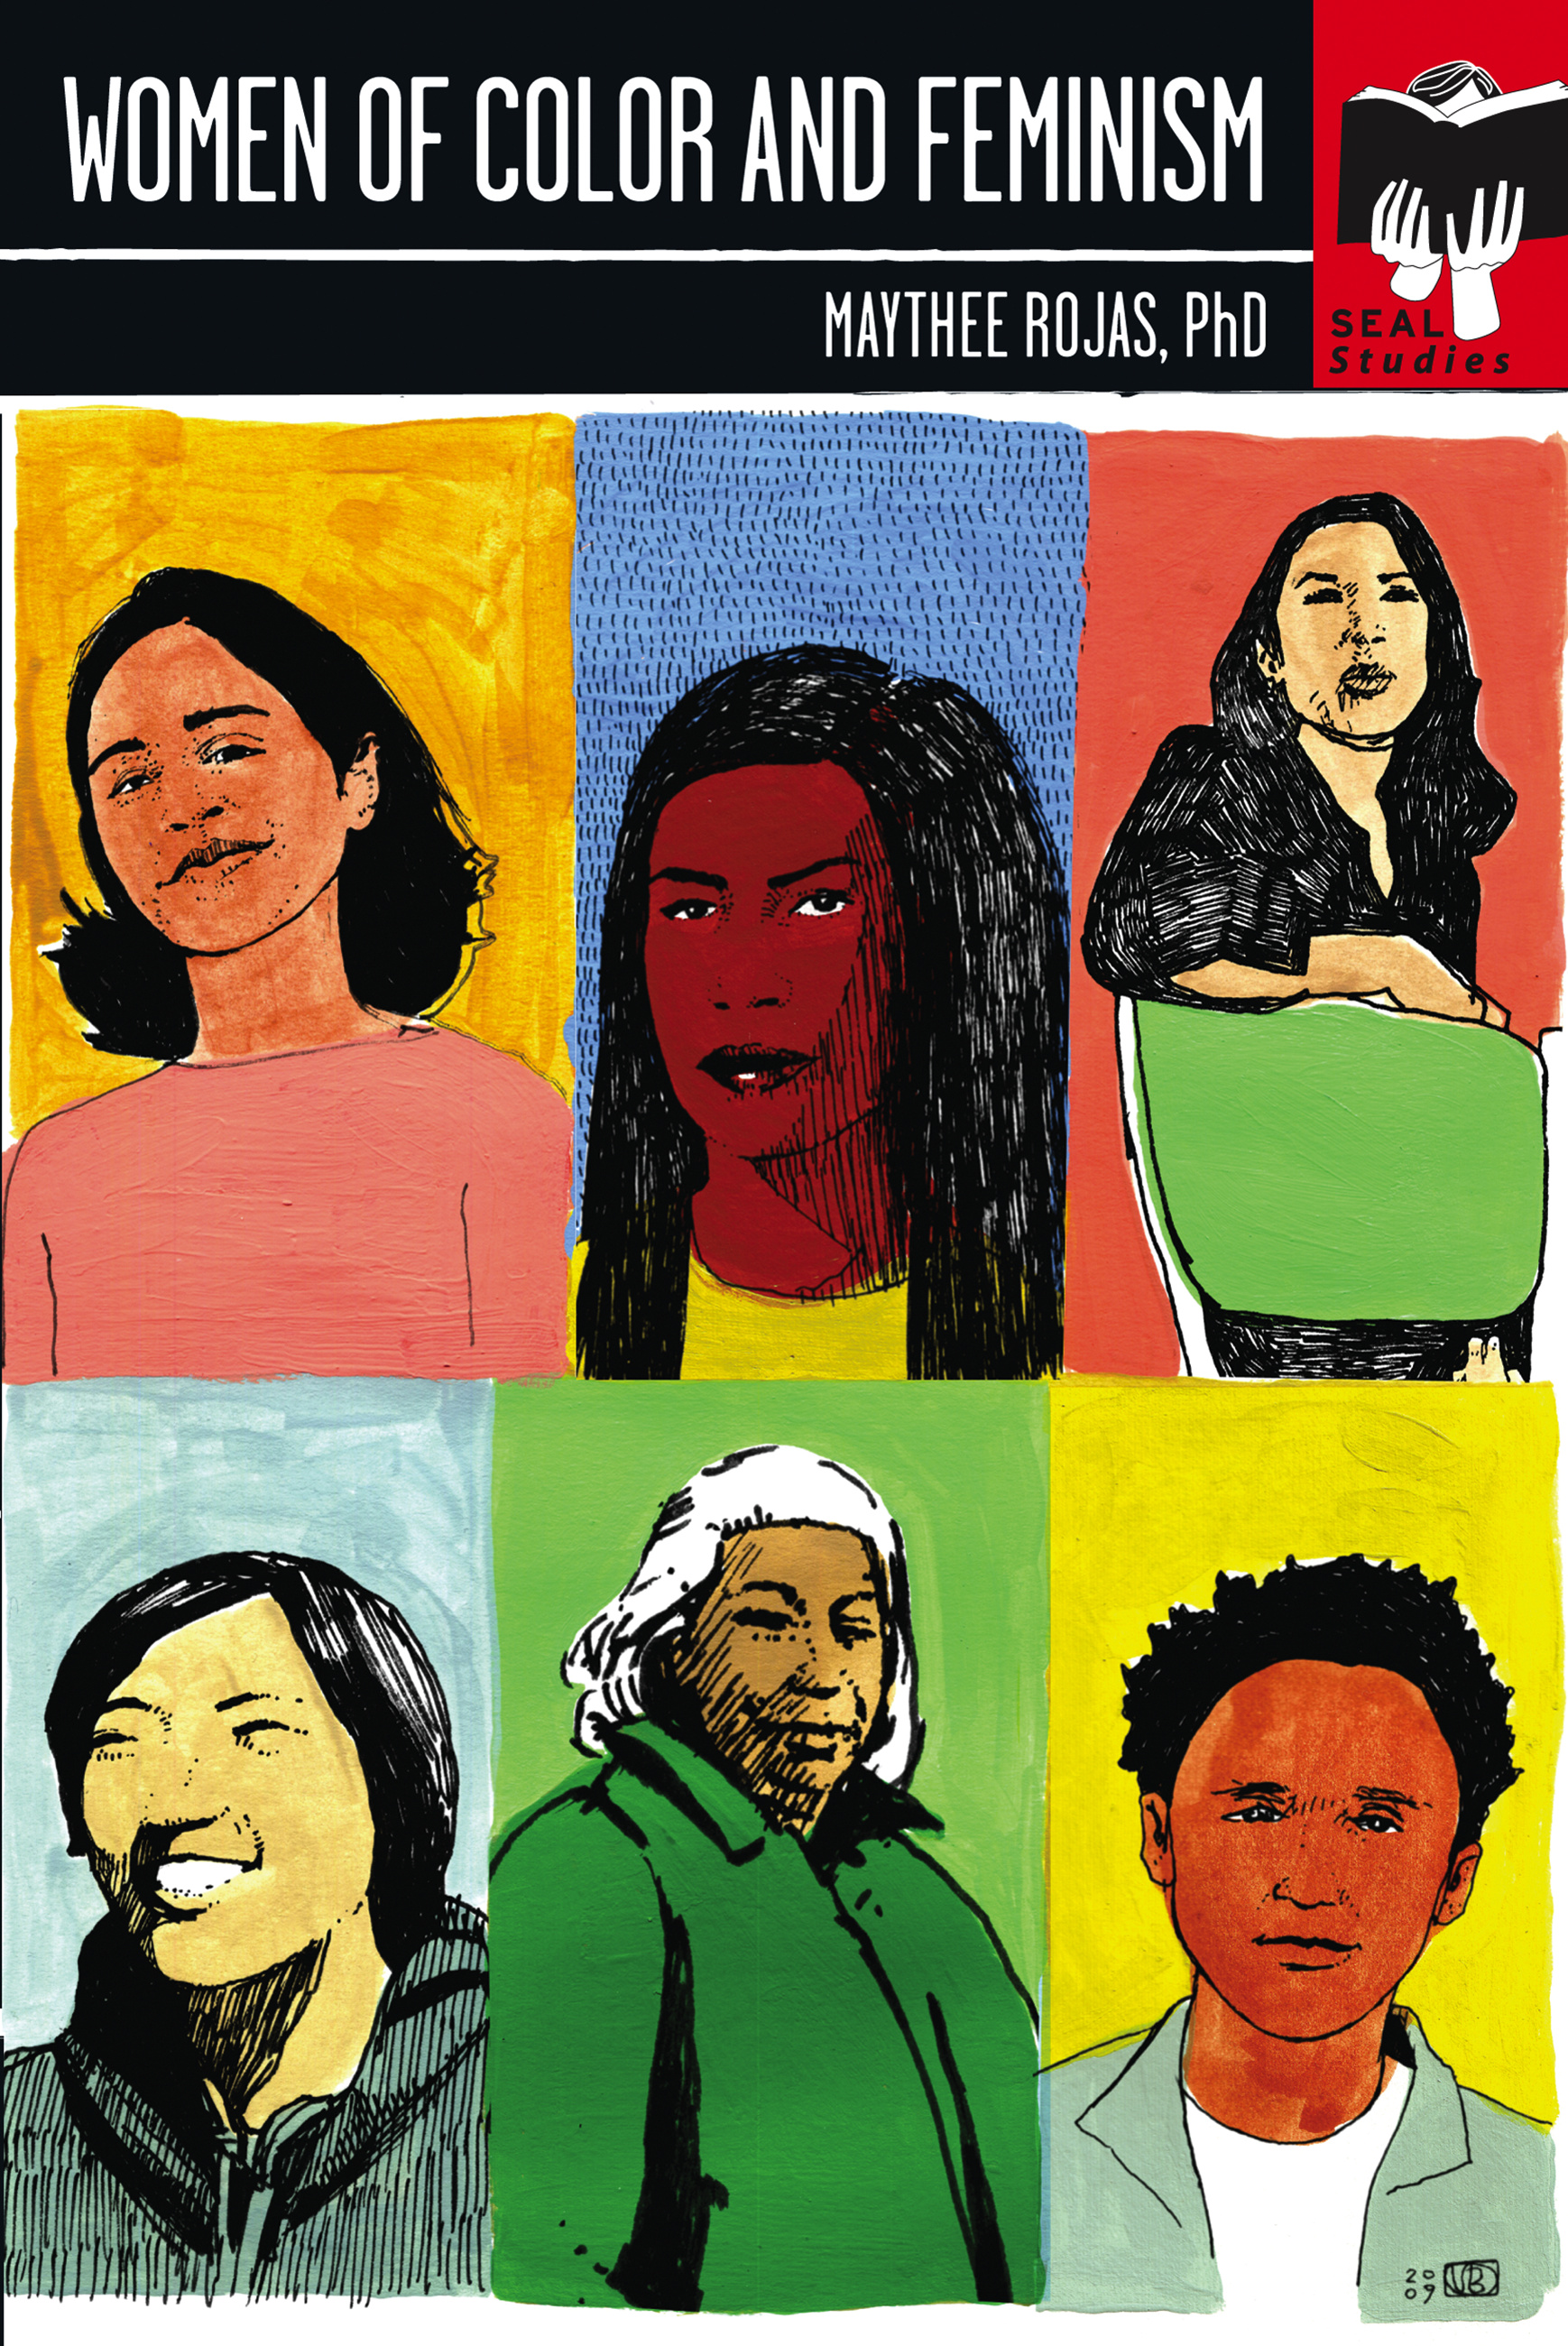 Women of Color and Feminism by Maythee Rojas | Hachette Book Group